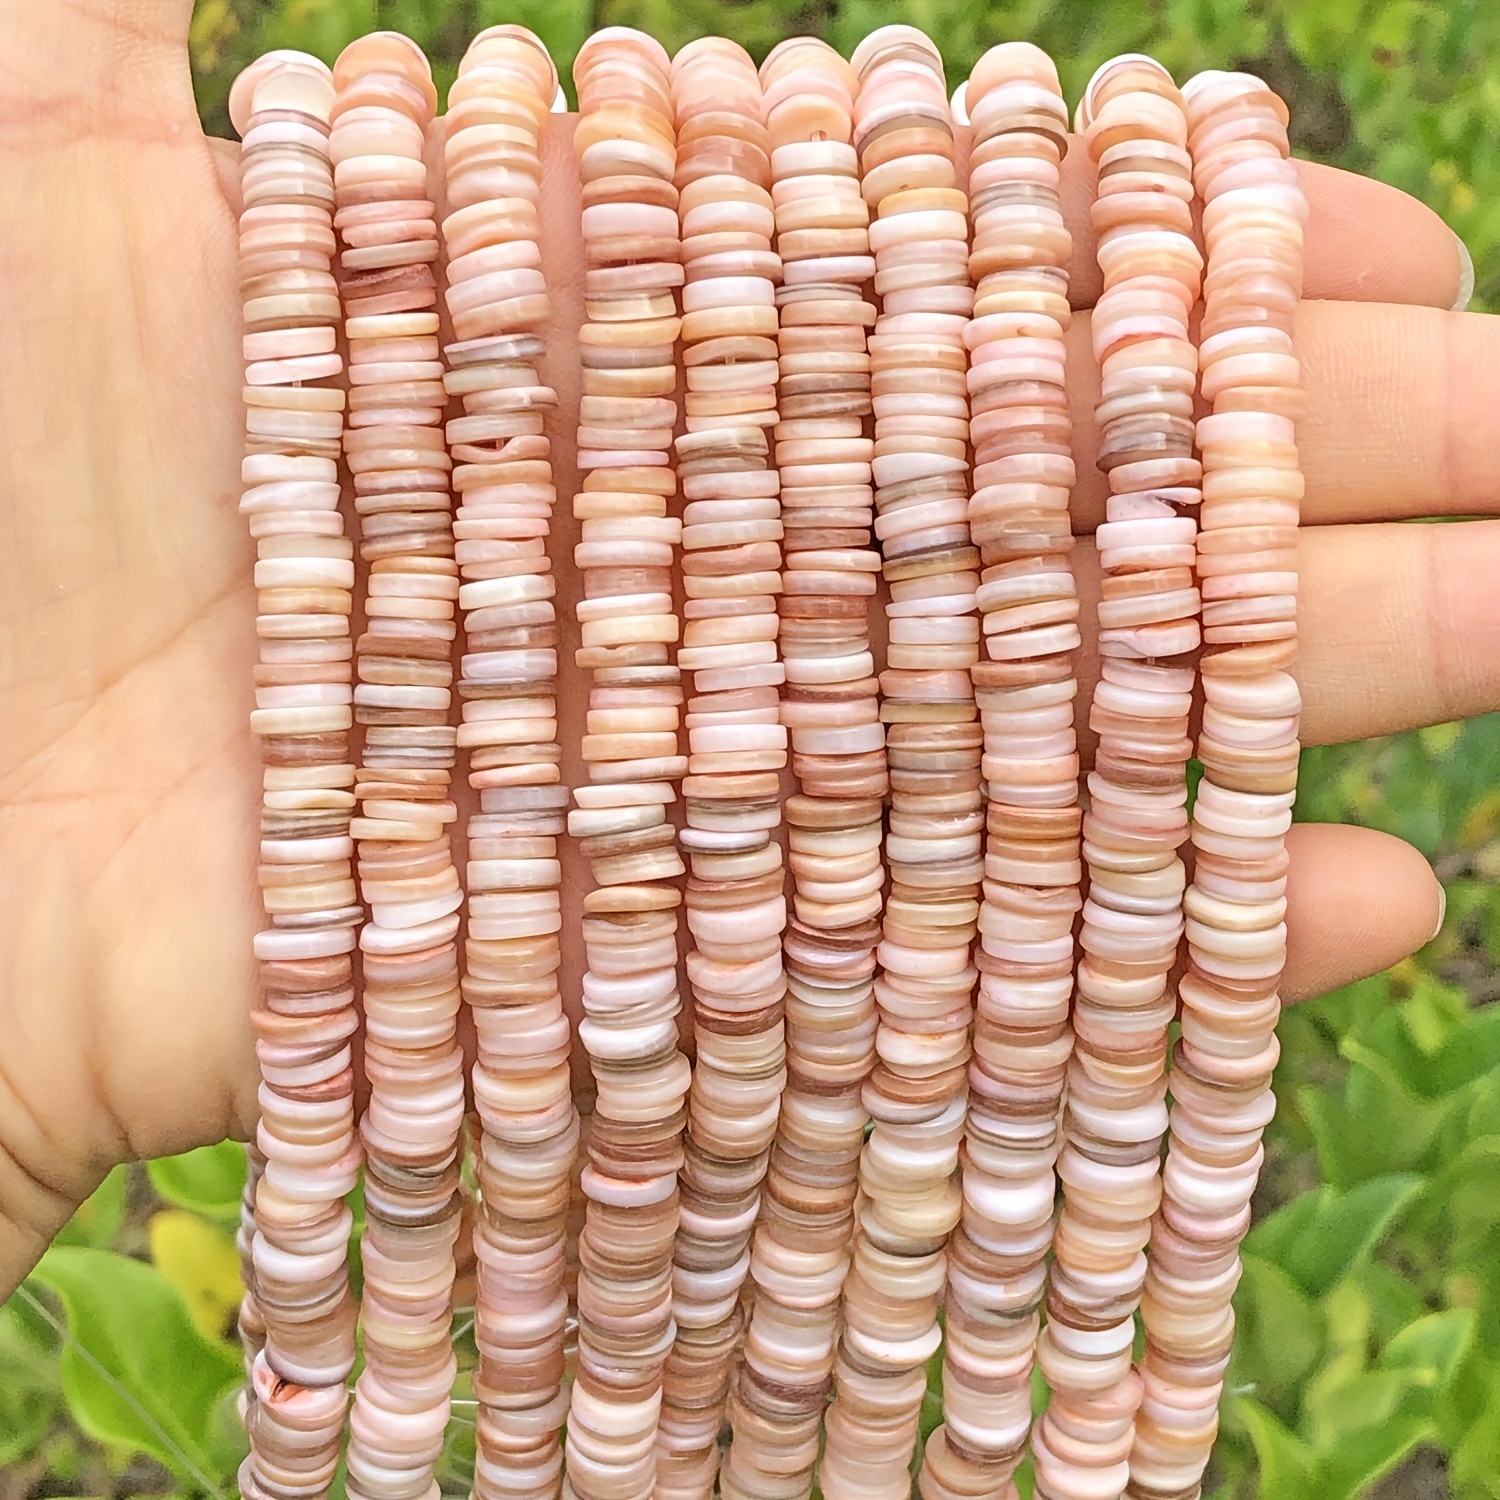 

180-190pcs 8mm Natural Pink Freshwater Shell Flat Round Beads For Jewelry Making Diy Special Bracelet Earrings Necklace Handmade Craft Supplies